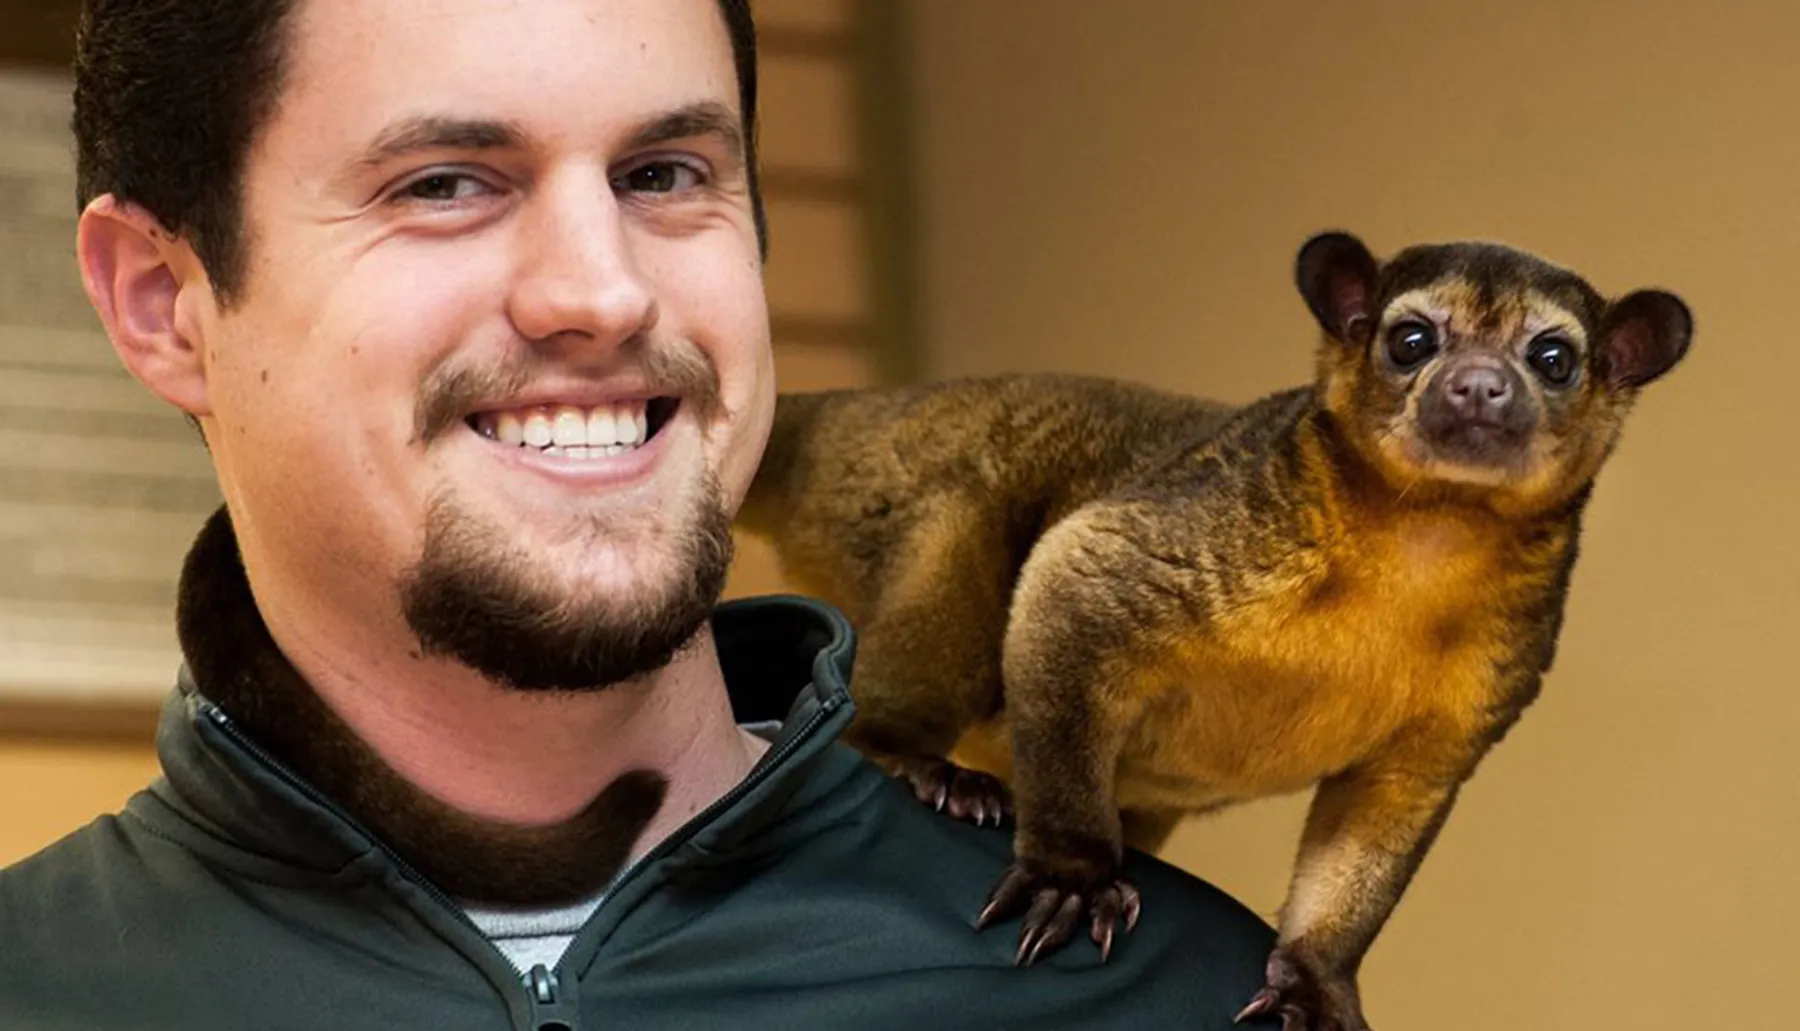 A smiling man poses with a kinkajou perched on his shoulder.